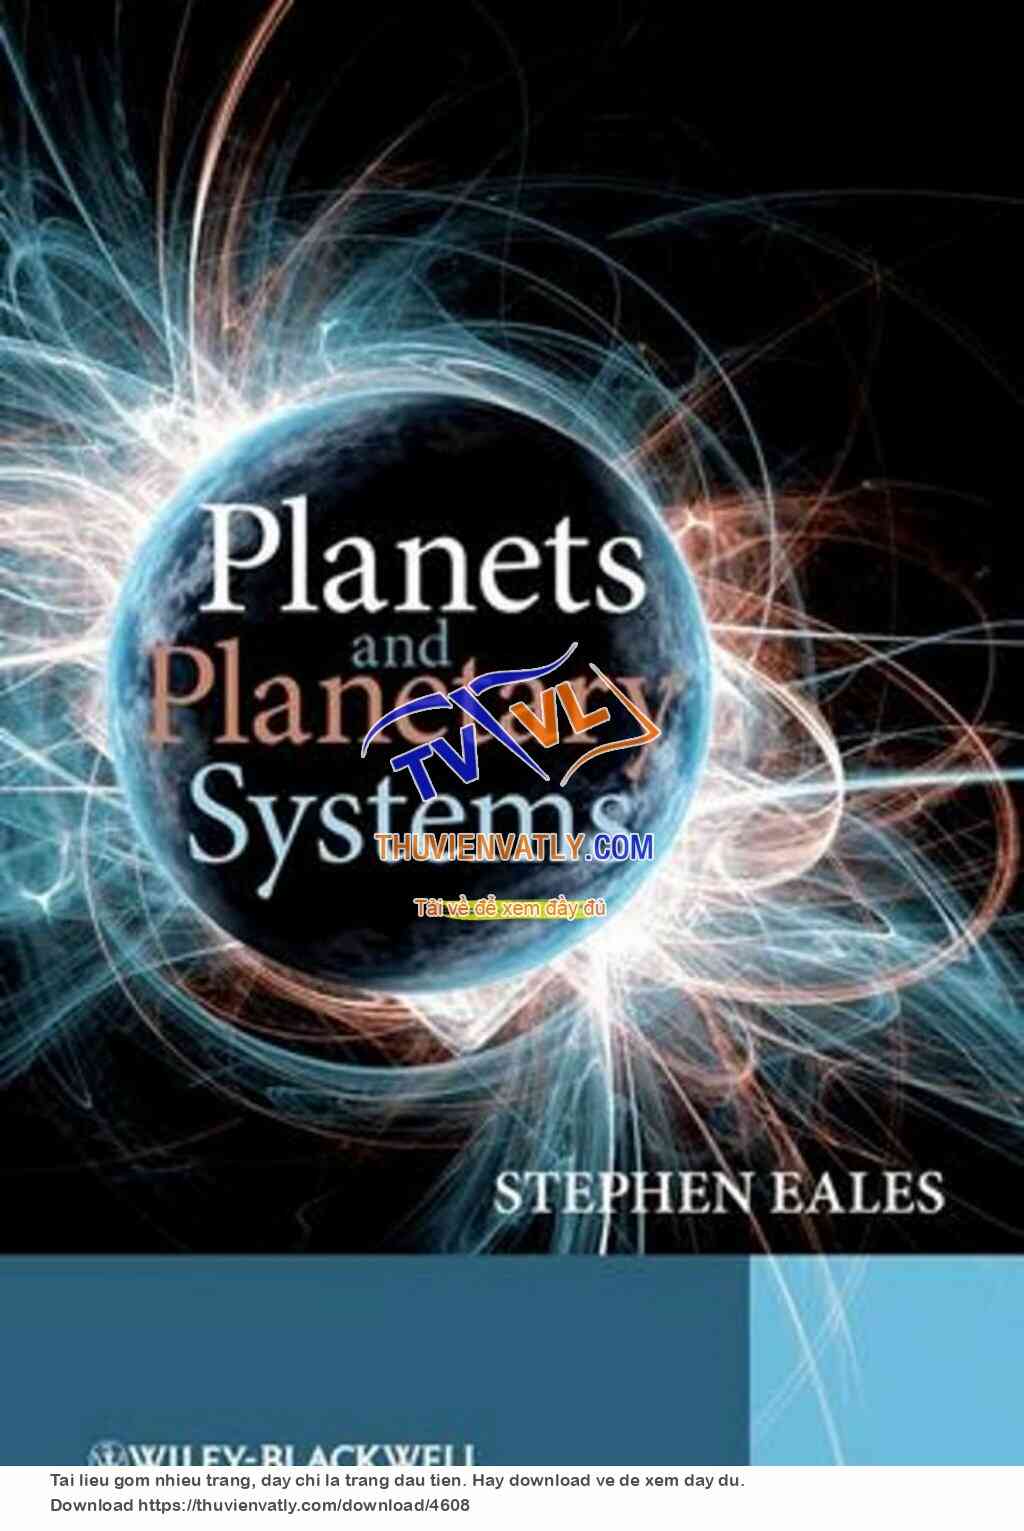 Planets and Planetary Systems